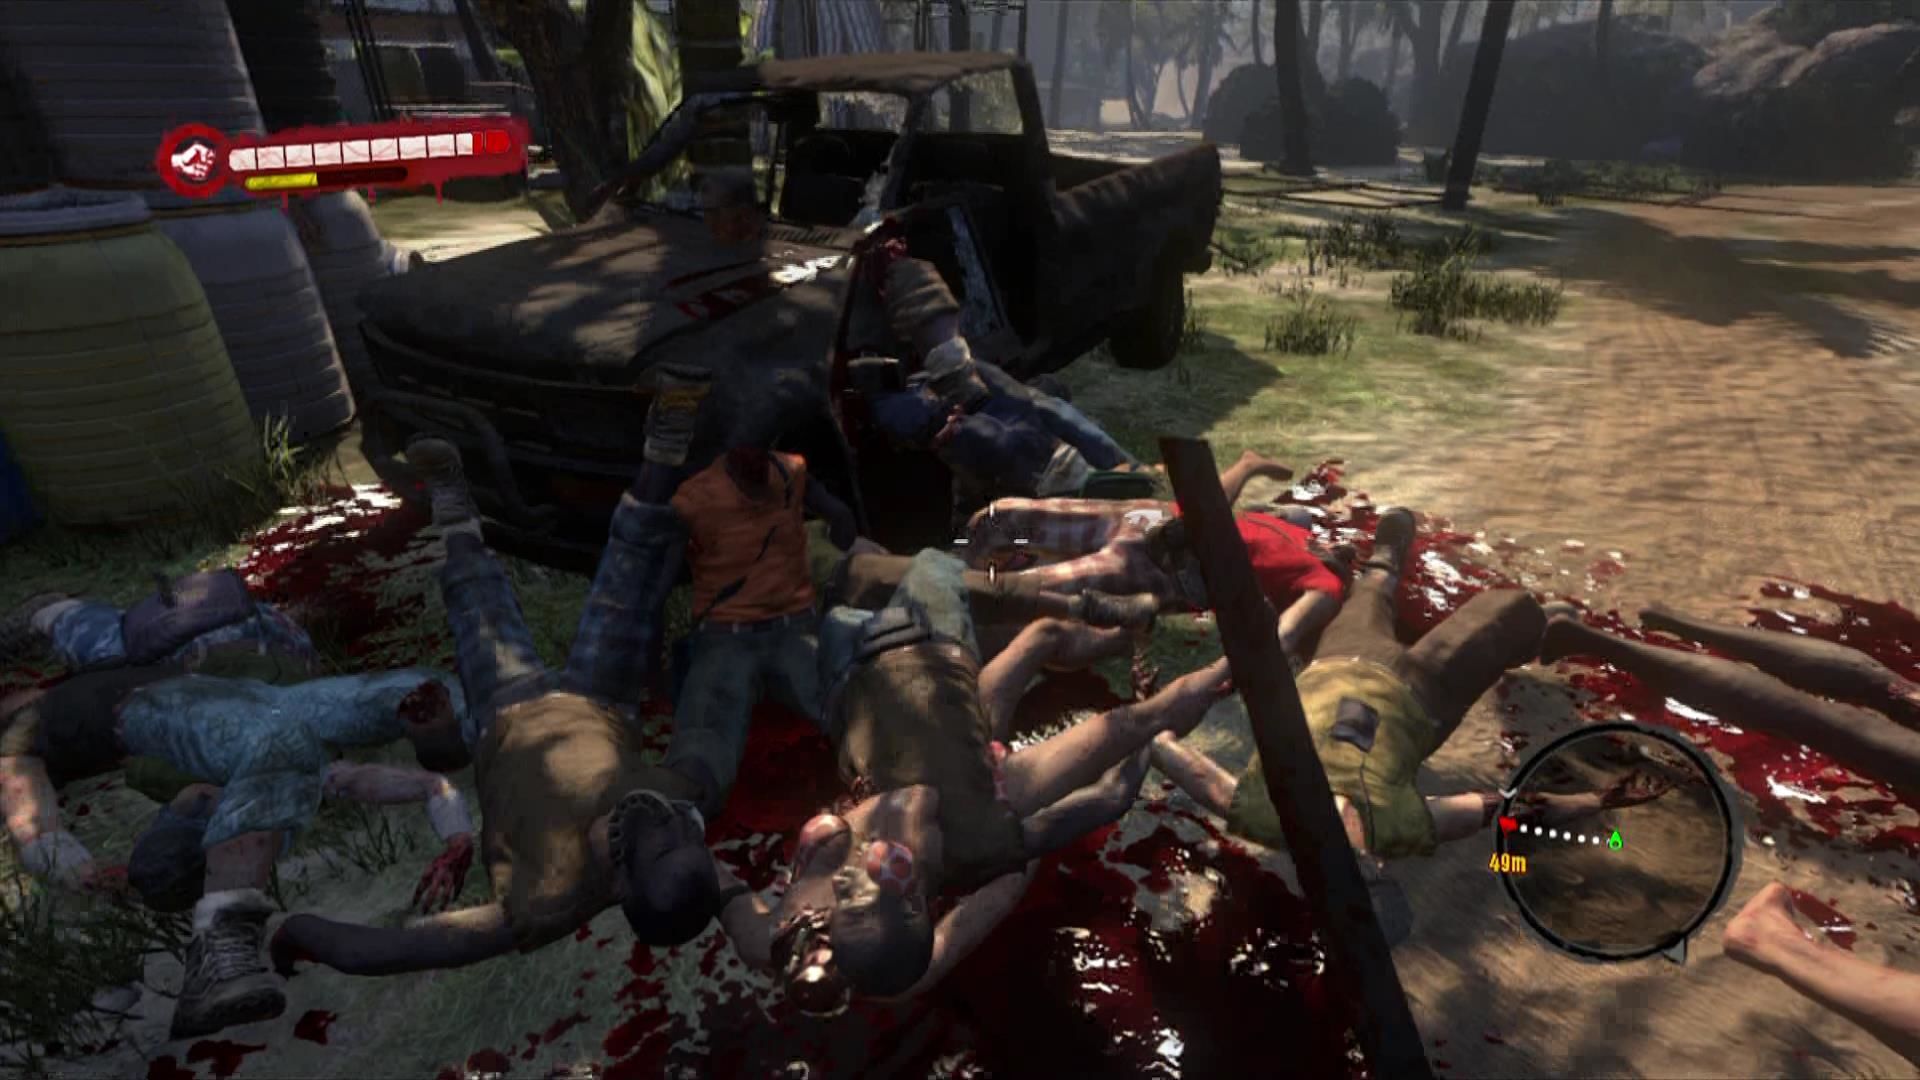 Dead Island [Game Of The Year Platinum Hits]